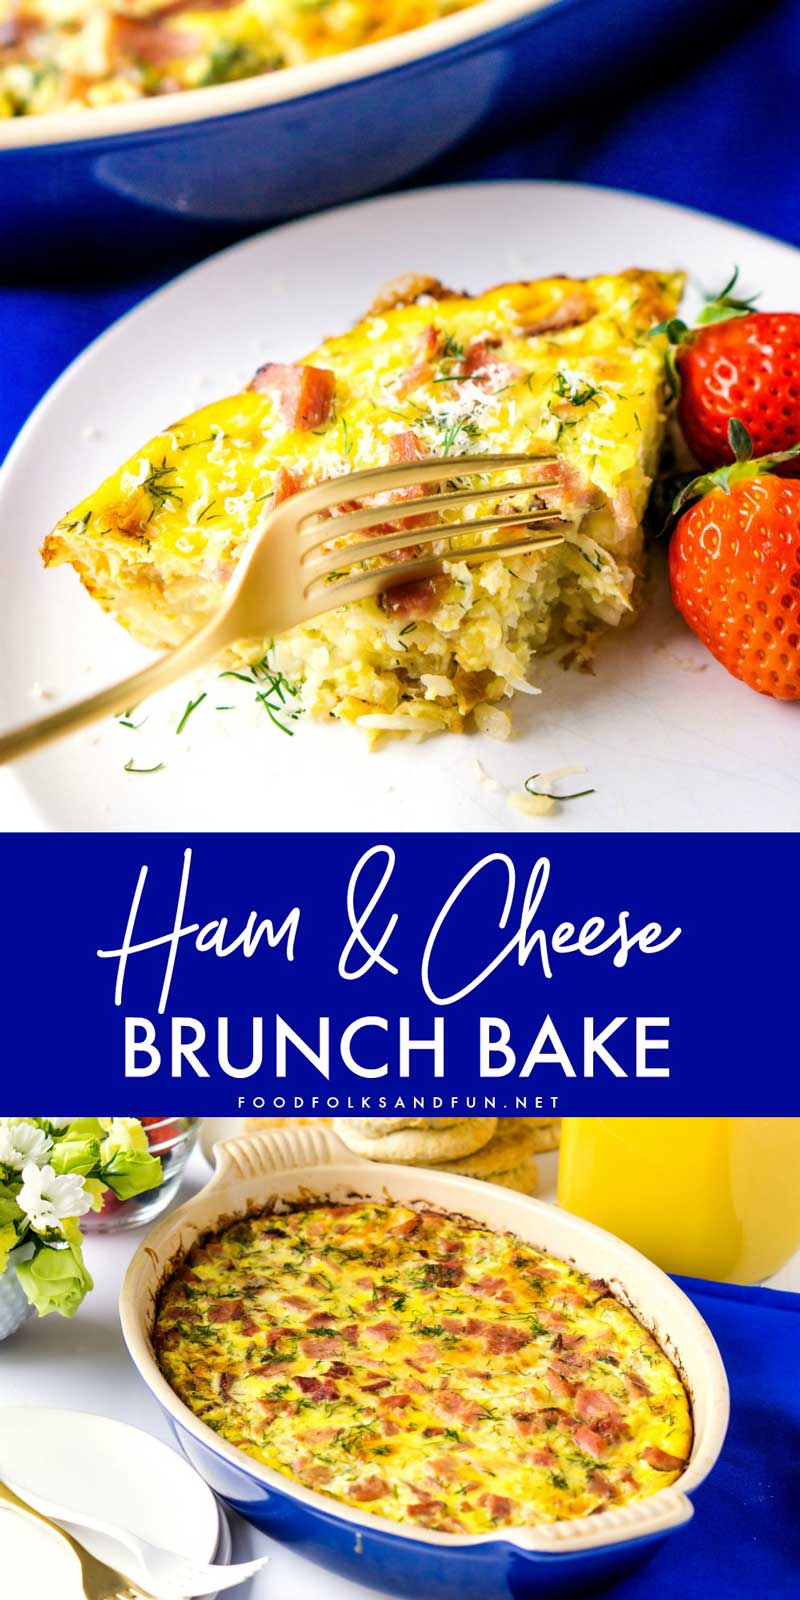 This Sherry, Ham and Cheese Brunch Bake is an easy main dish for brunch. It’s layered with so much flavor and you can make it ahead of time, too.
#brunch #breakfast #casserole #ham #cheese #comfortfood #eggs  via @foodfolksandfun